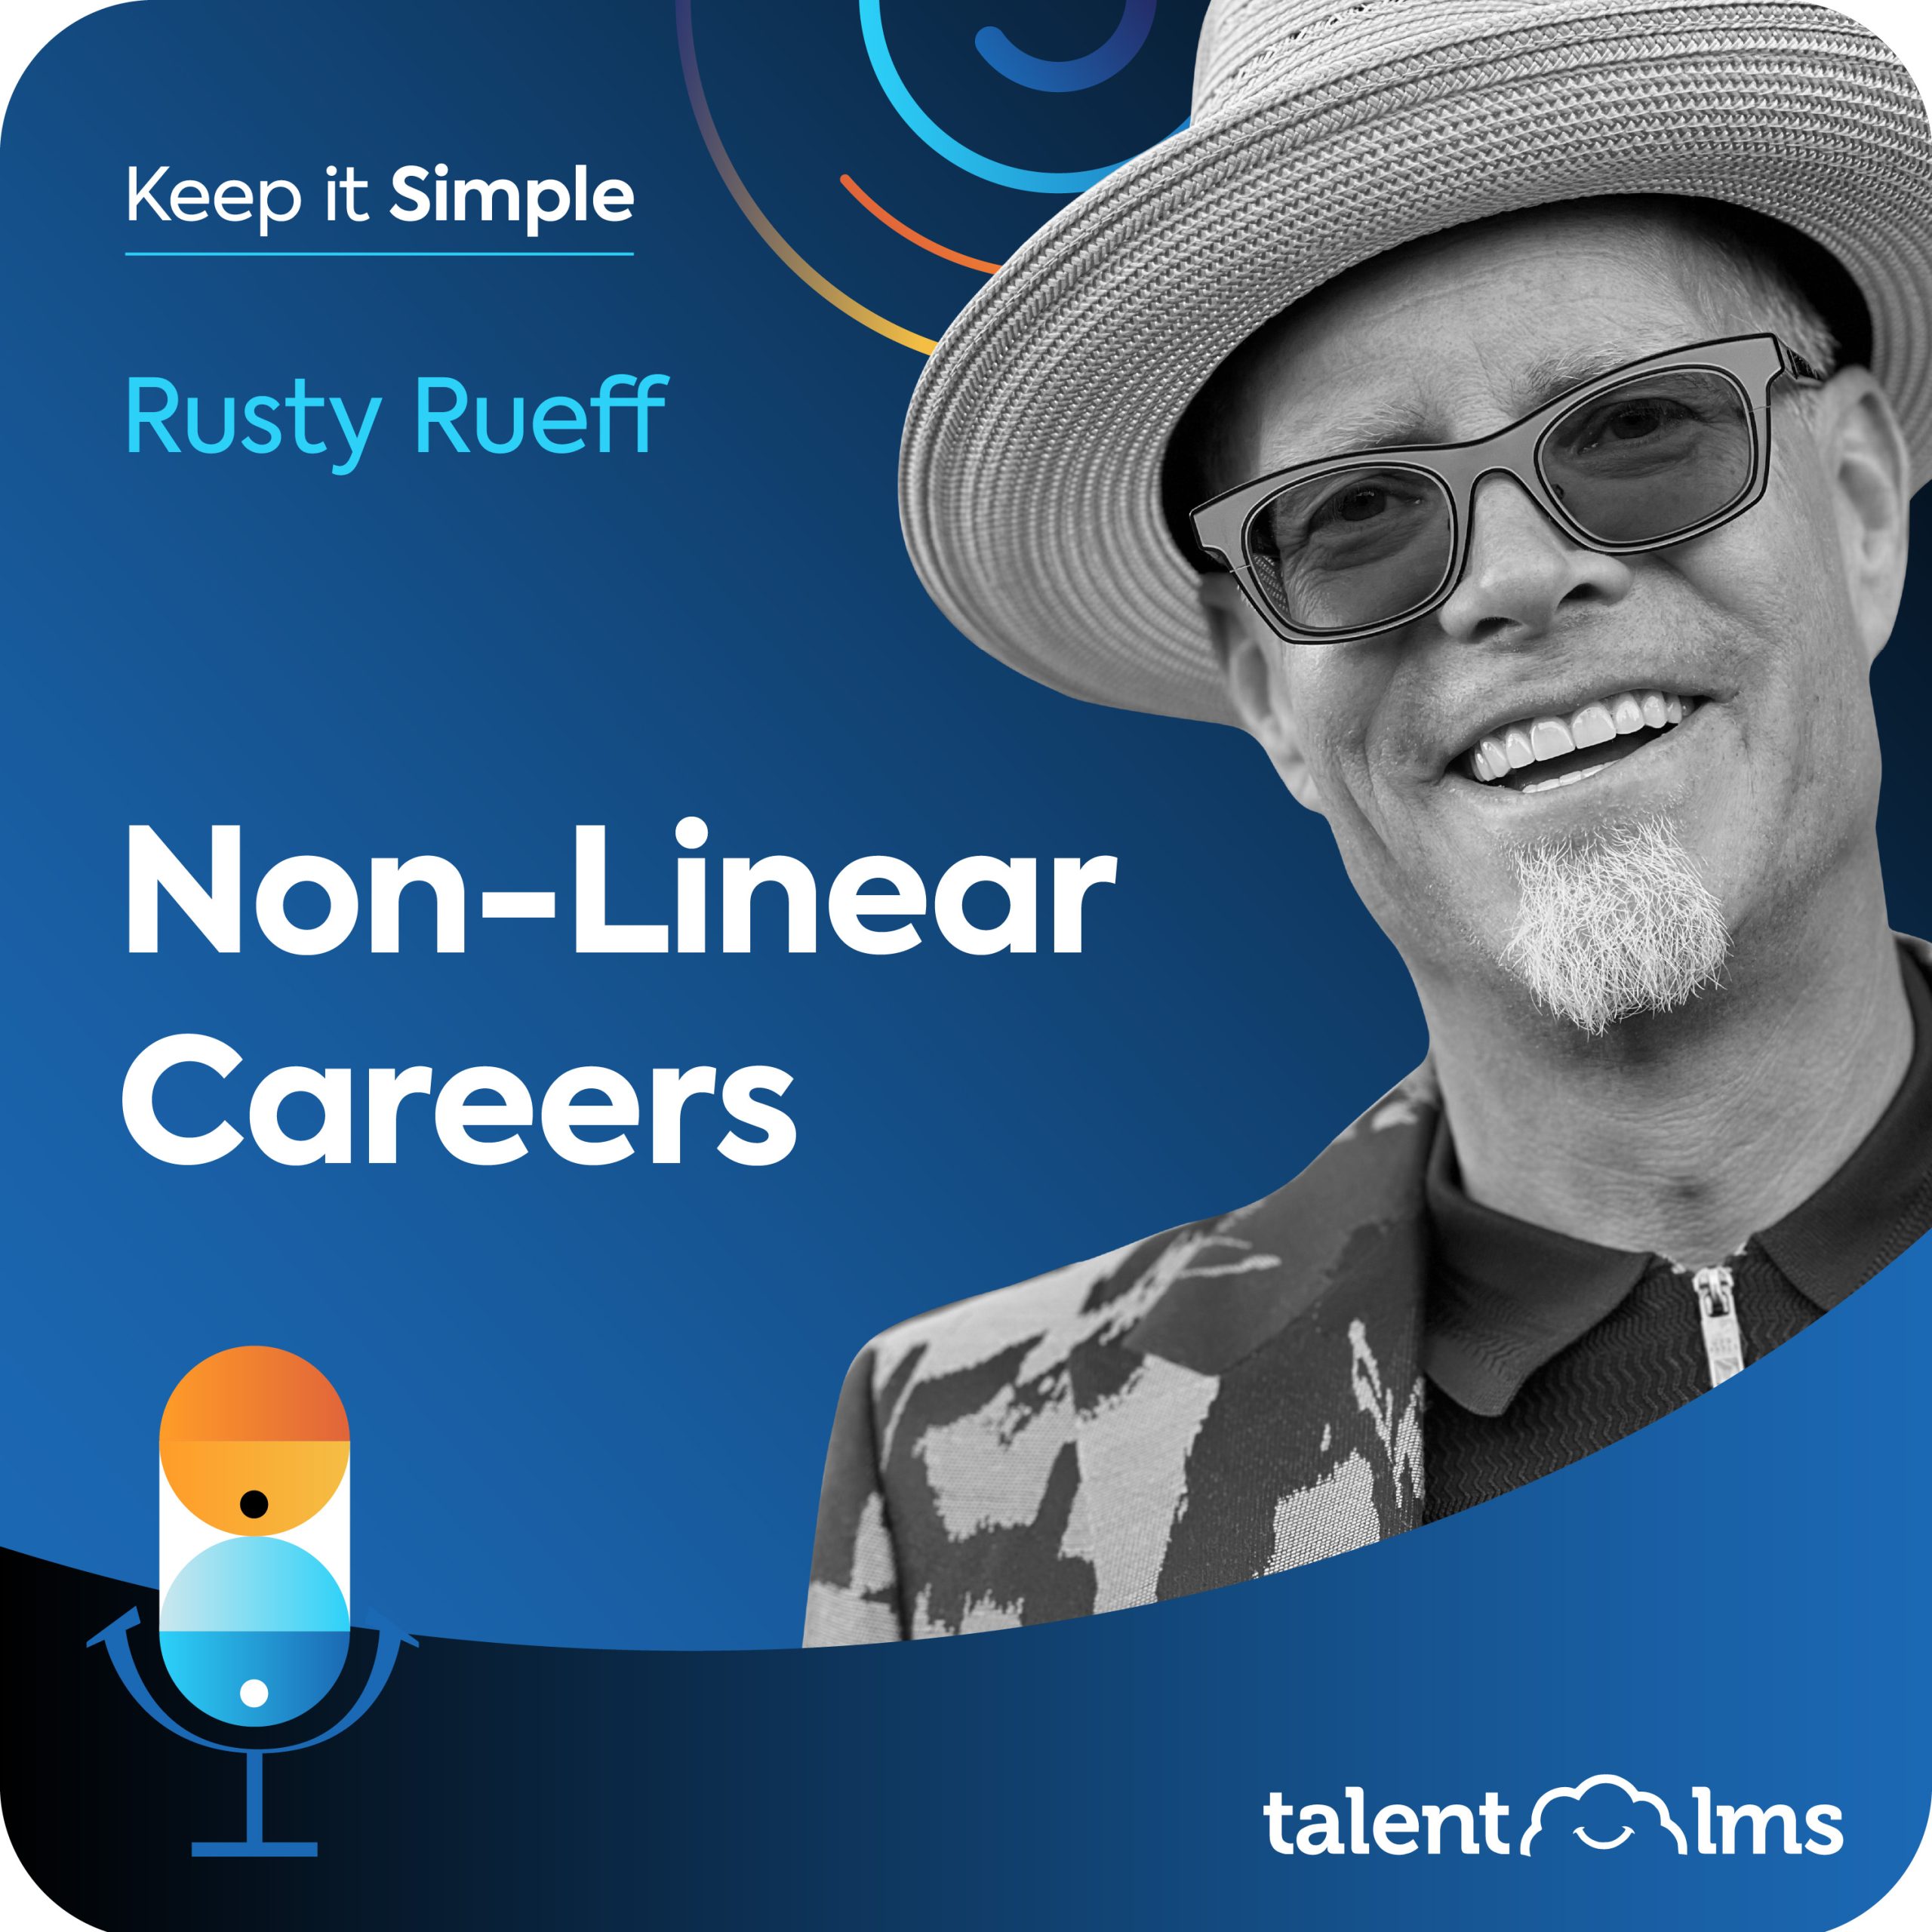 Headshot of Keep it SImple guest Rusty Rueff on a blue background with the words "non-linear careers". Surrounding Rusty is a brightly coloured microphone and the TalentLMS logo.